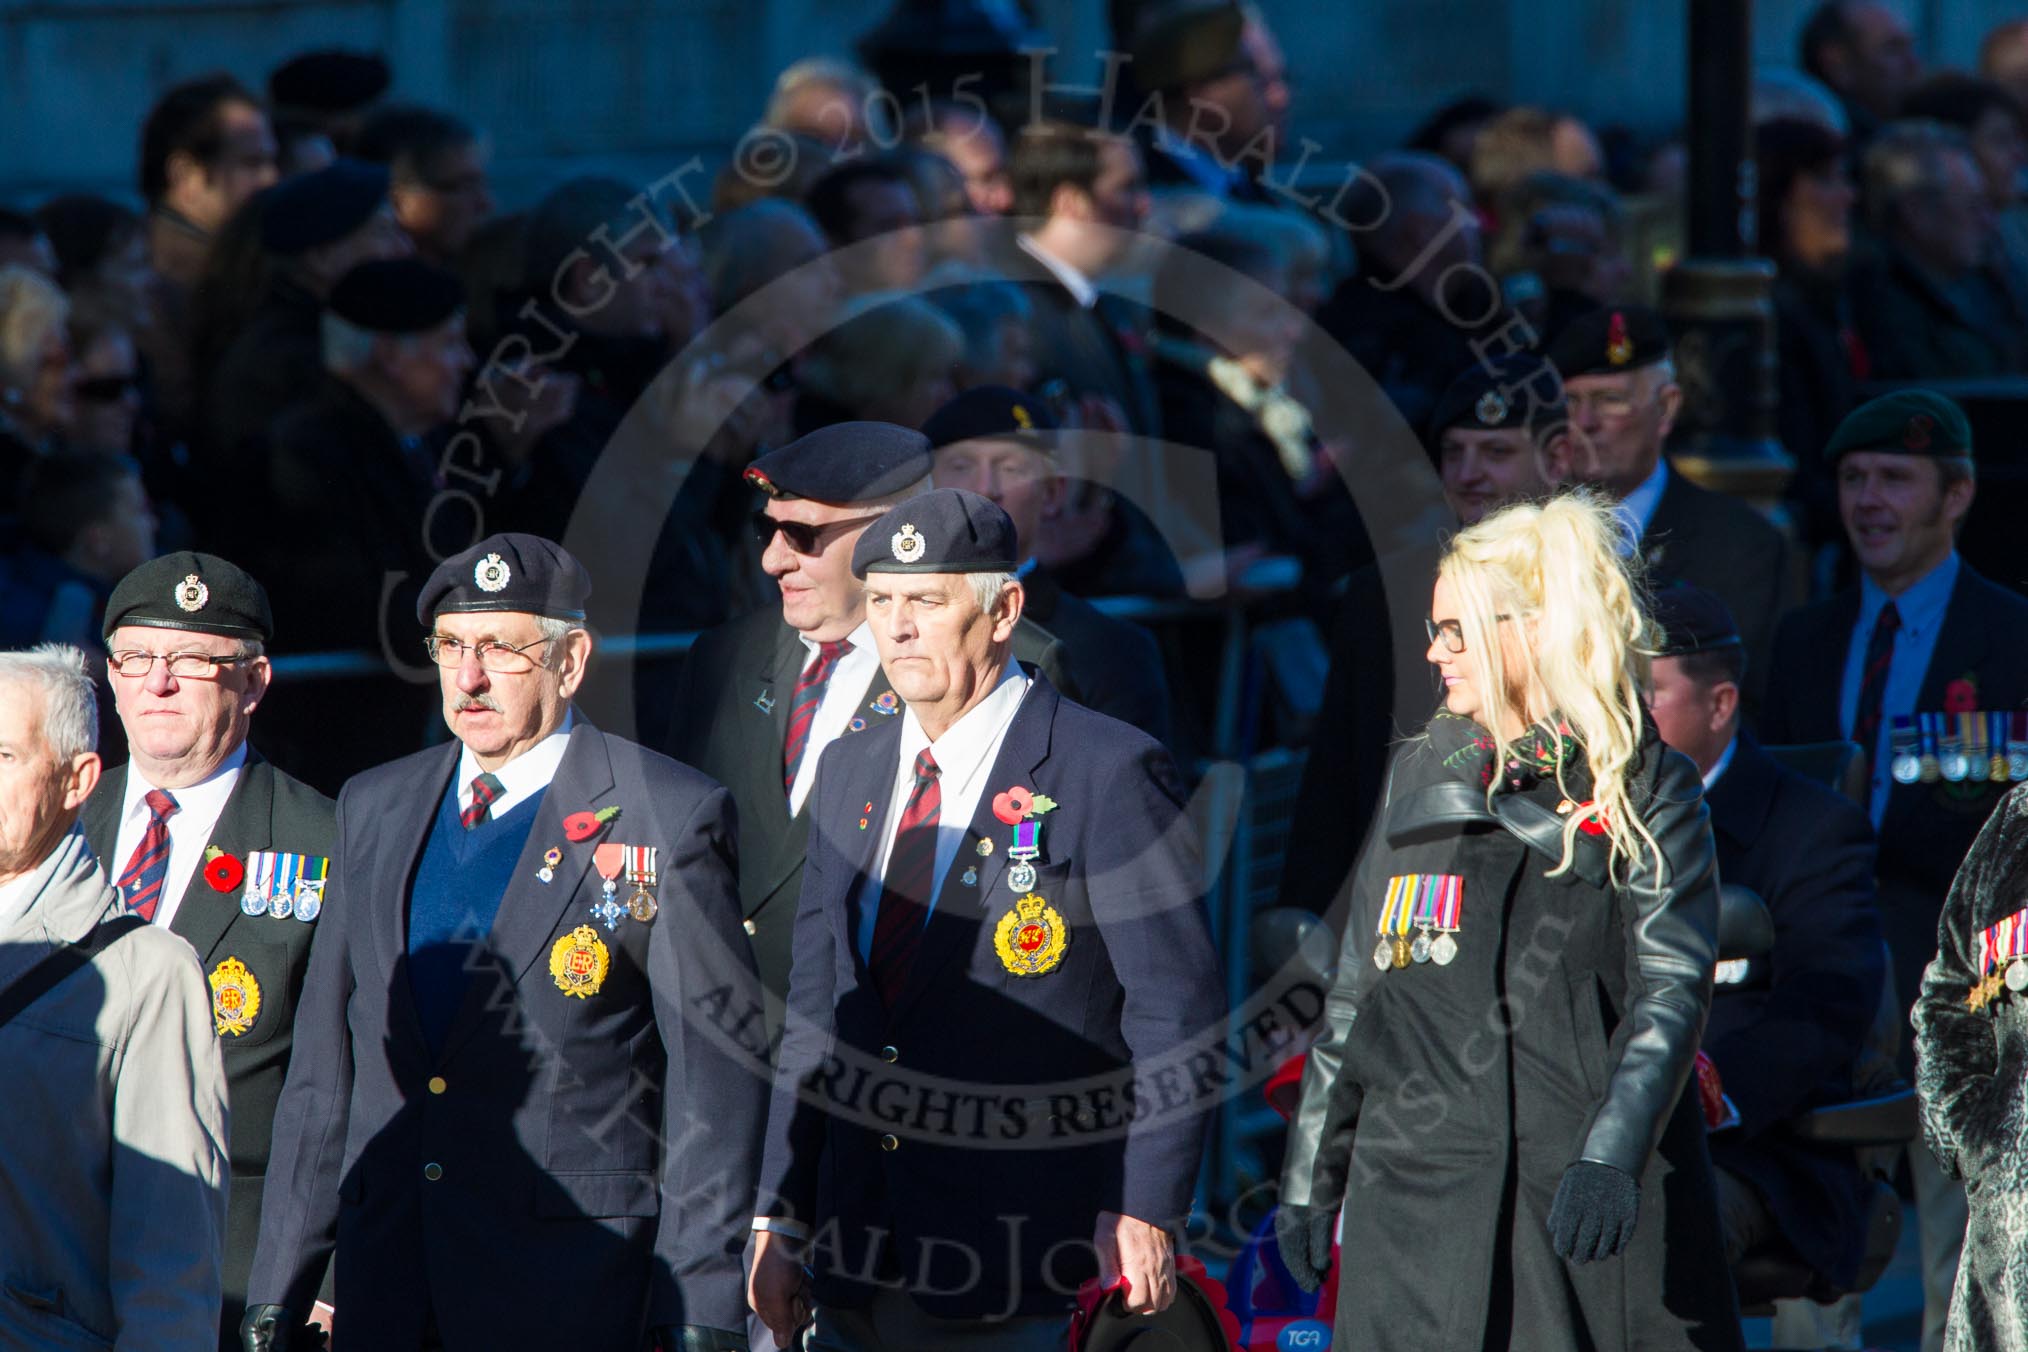 Remembrance Sunday Cenotaph March Past 2013: B20 - Royal Engineers Association..
Press stand opposite the Foreign Office building, Whitehall, London SW1,
London,
Greater London,
United Kingdom,
on 10 November 2013 at 12:01, image #1461